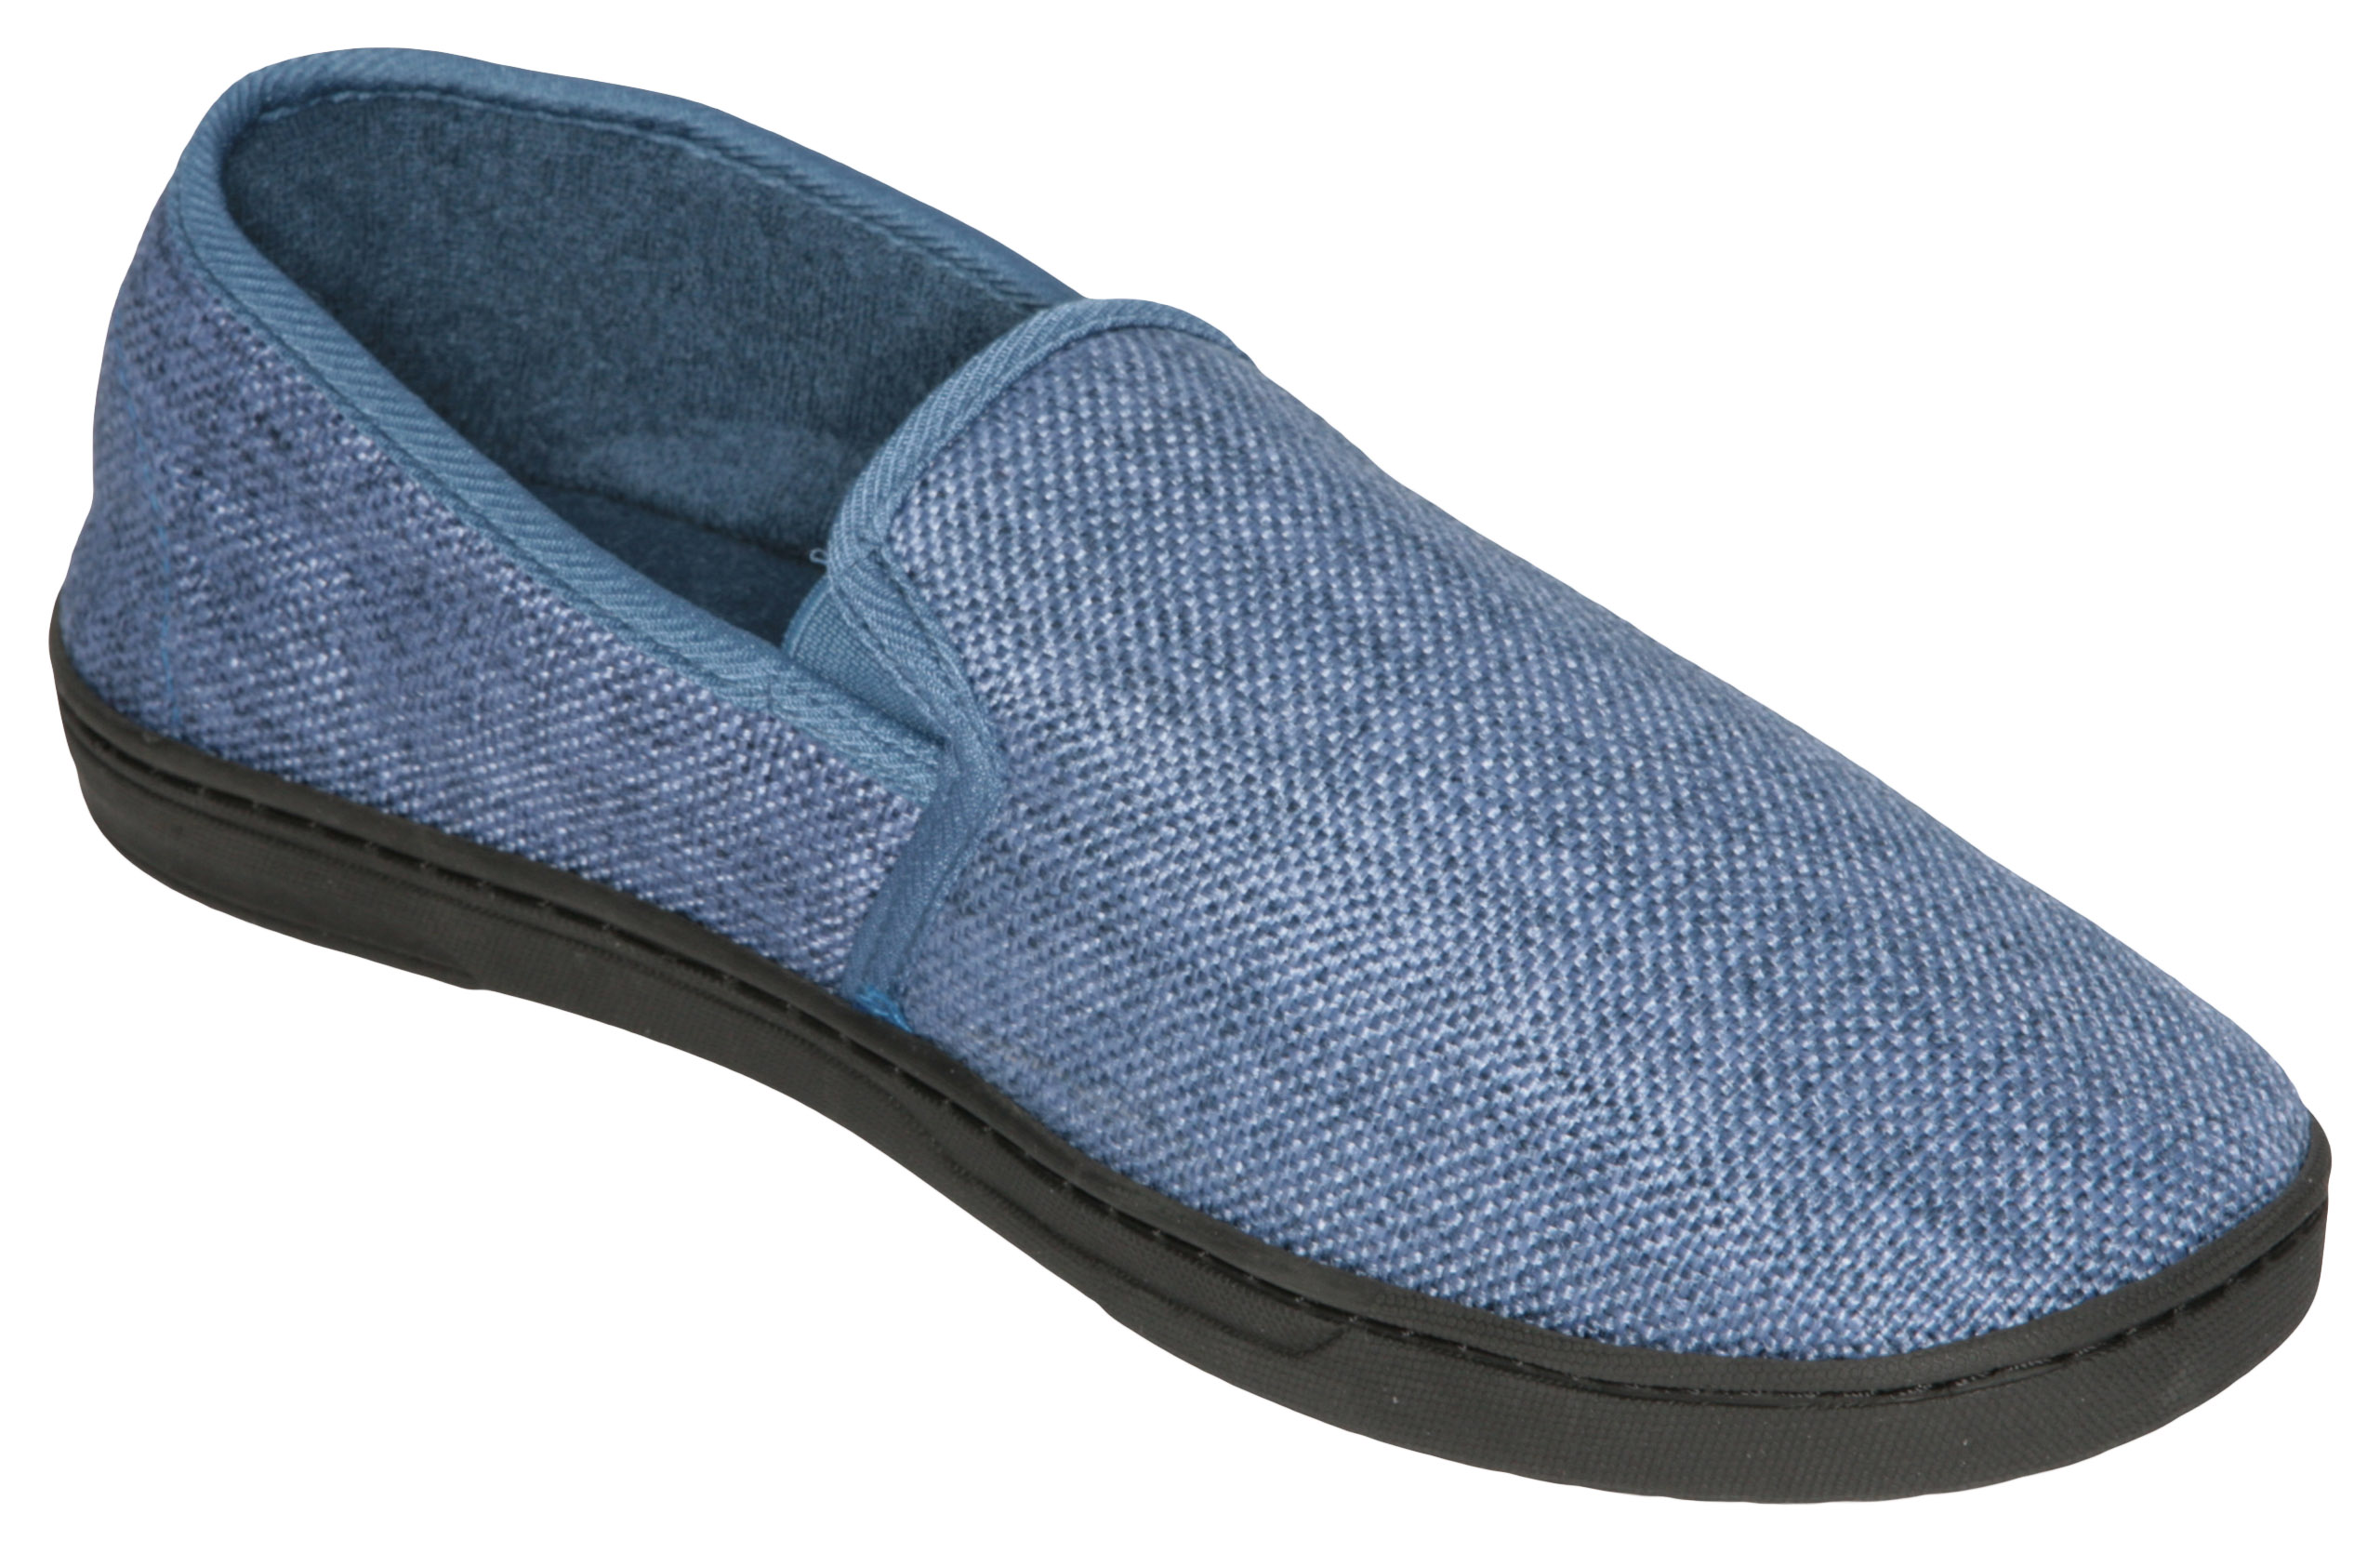 Deluxe Comfort Men's Memory Foam Slipper, Size 11-12 – Soft Linen 120D SBR Insole and Rubber Outsole – Pure Suede Shoes – Non-Marking Sole – Men's Slippers, Blue - image 1 of 5